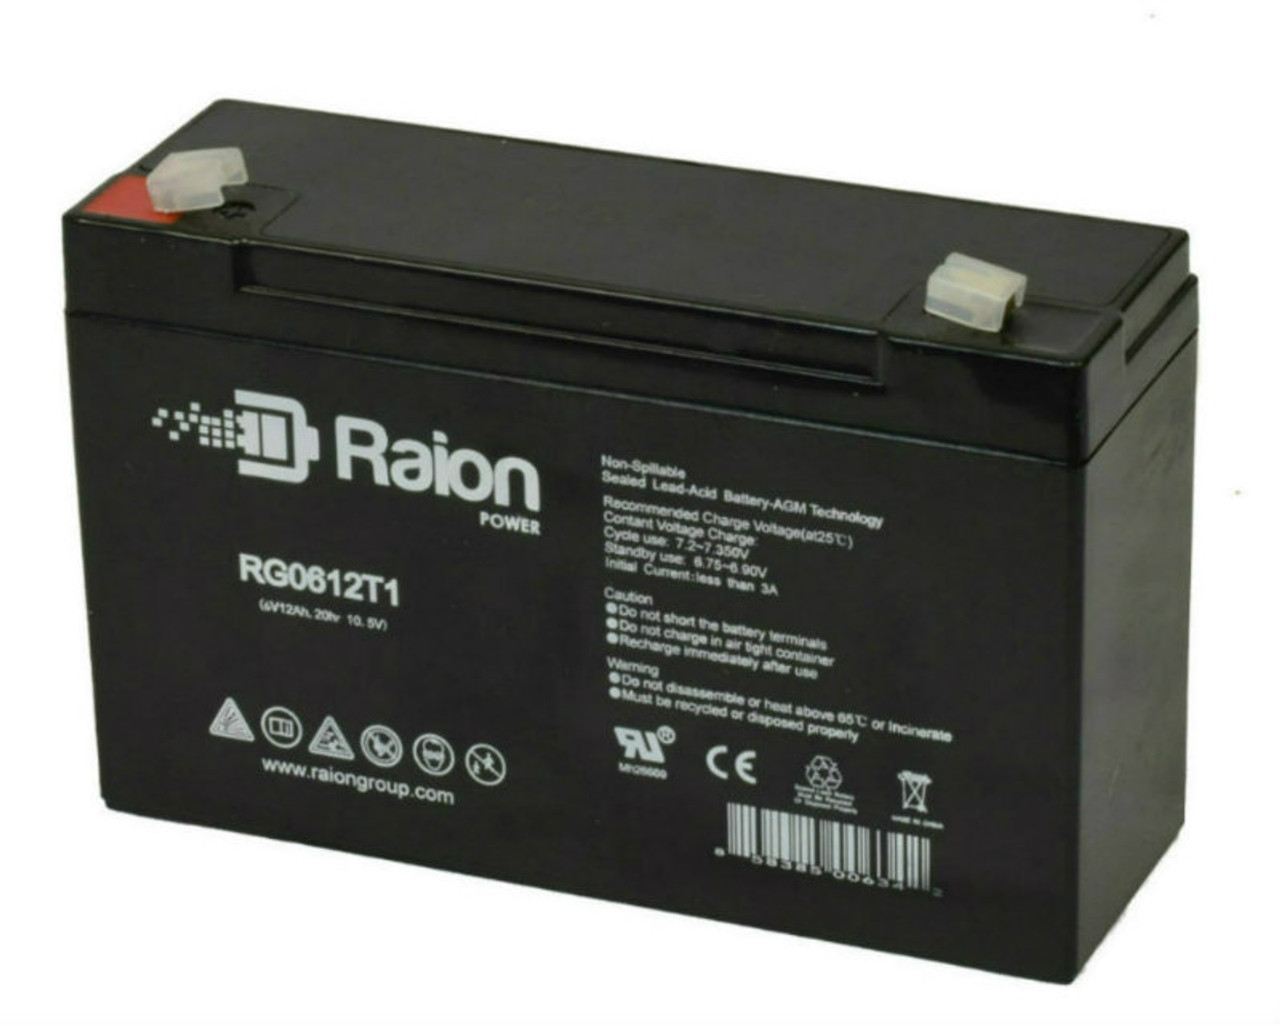 Raion Power RG06120T1 Replacement 6V 12Ah Emergency Light Battery for Dual Lite 12-805